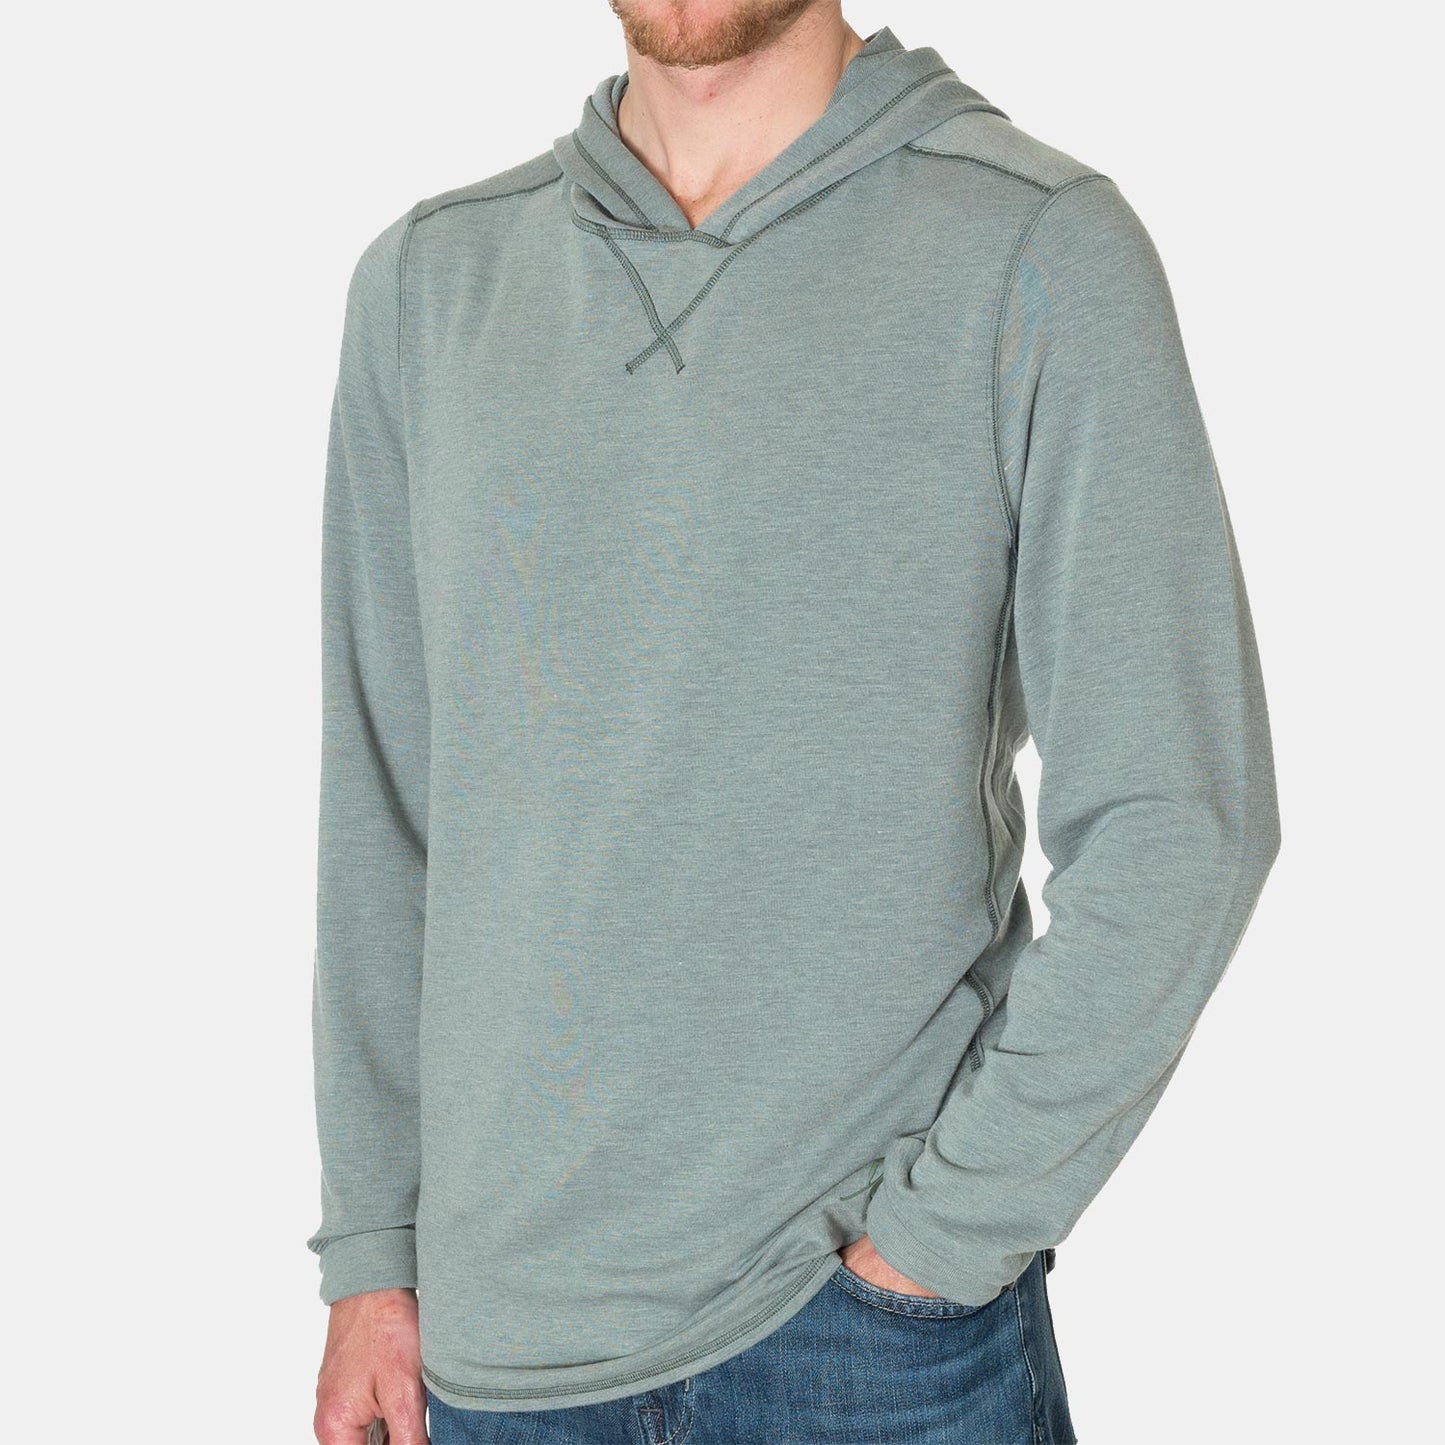 Toes on the Nose Super Soft Hoodie in Seafoam Green